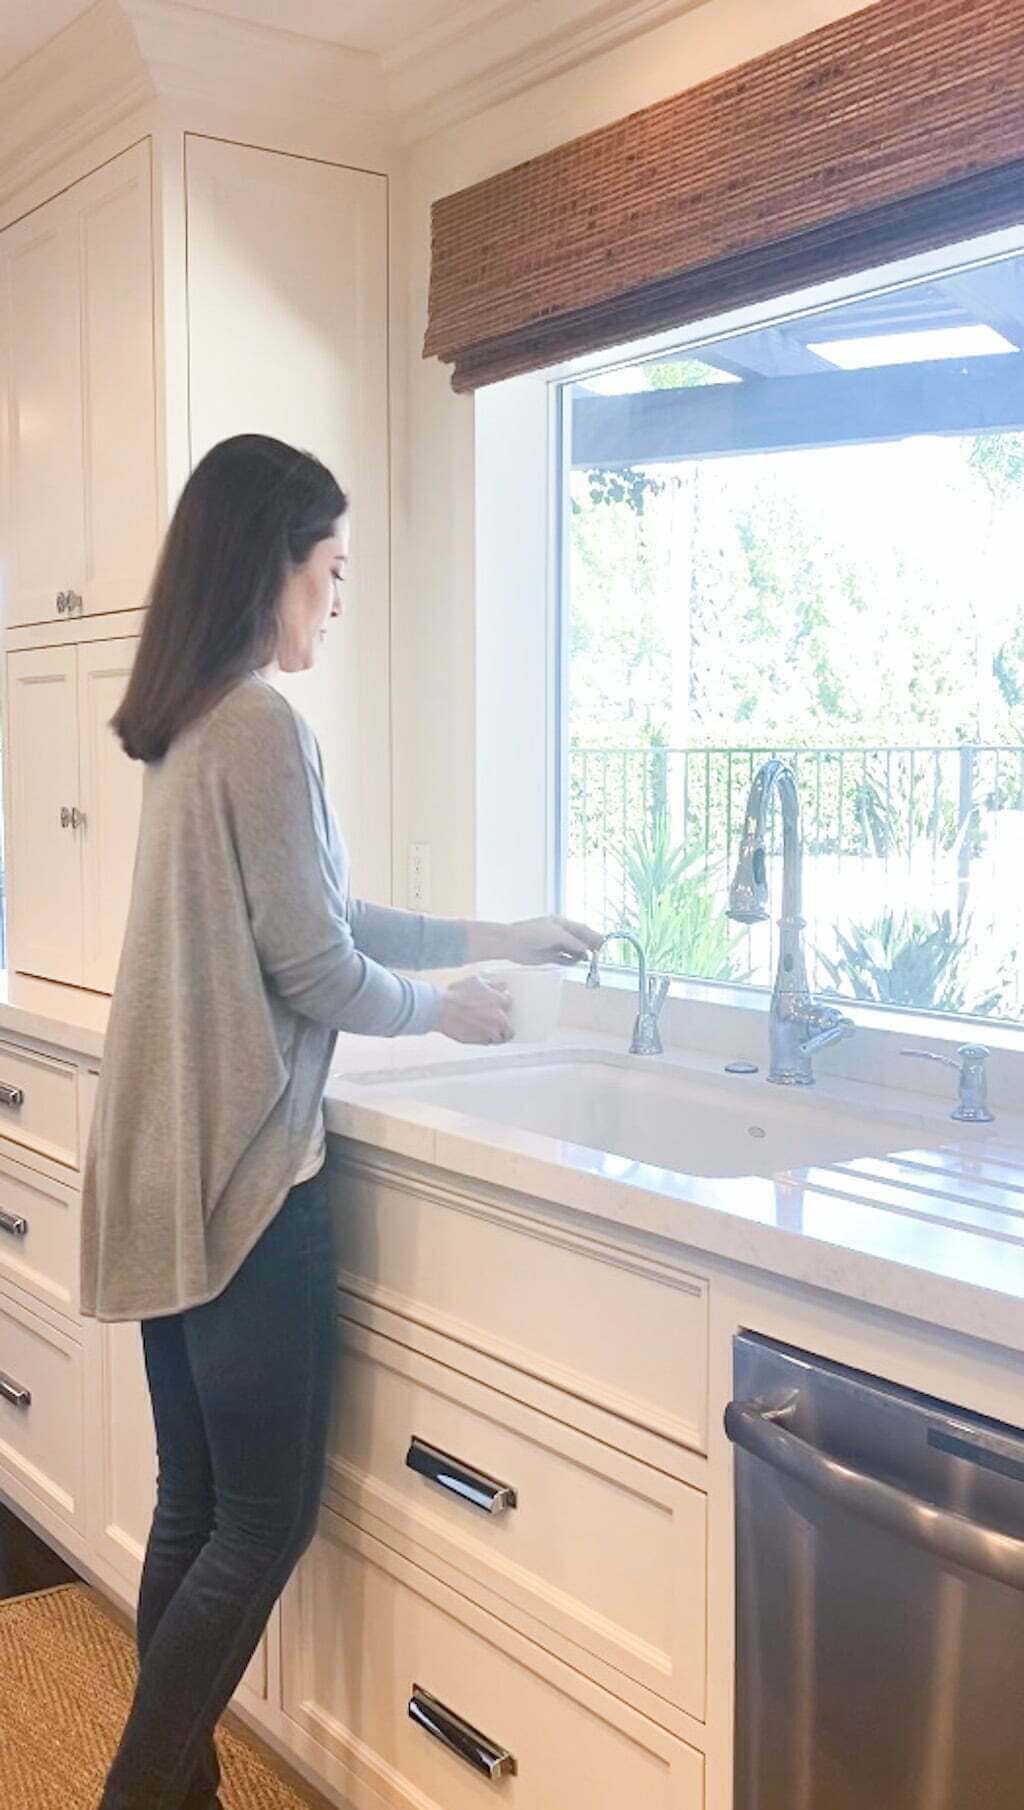 woman using instant hot water dispenser at sink in white kitchen with large picture window looking out to backyard